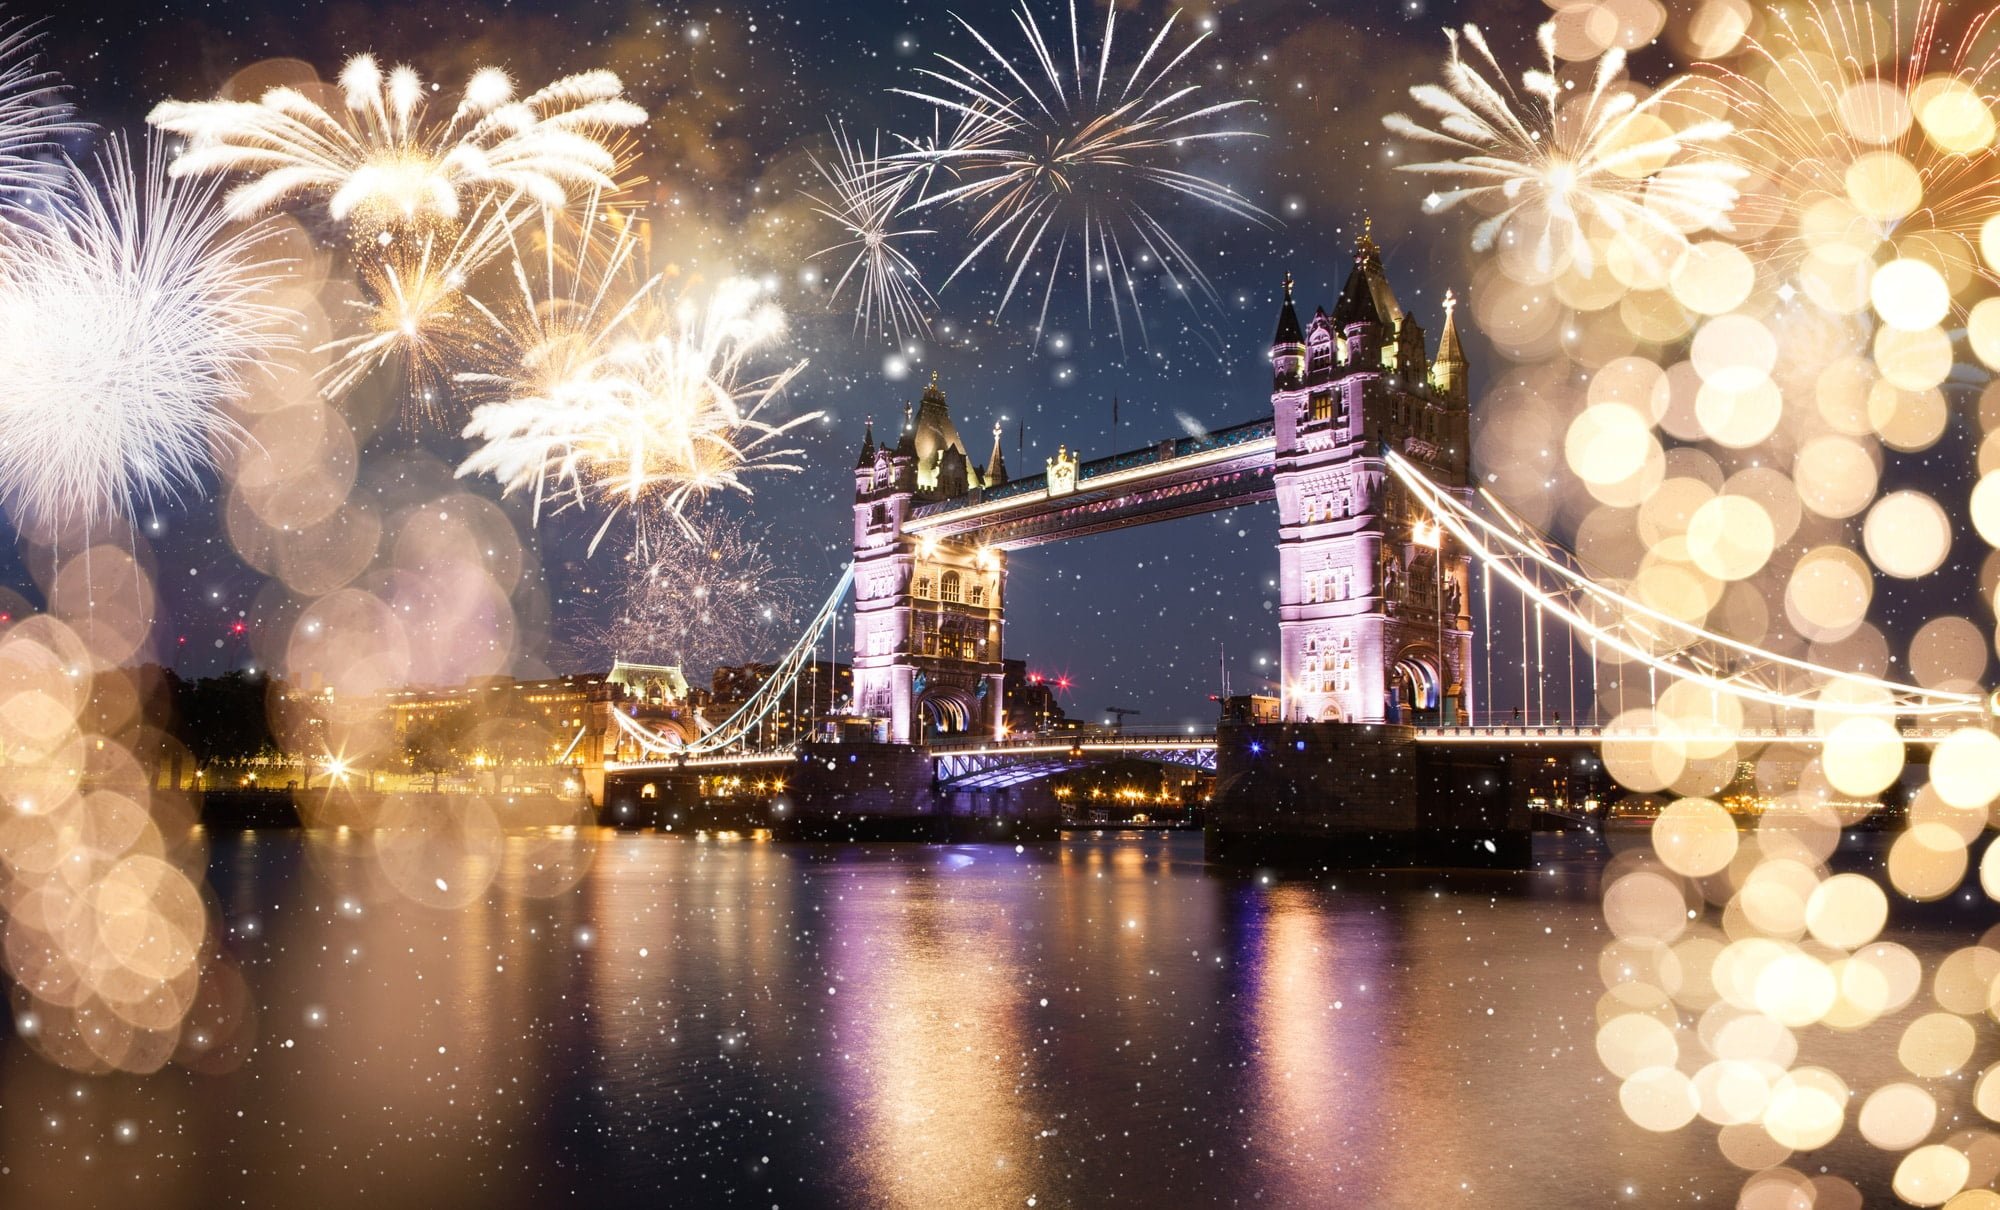 Tower Bridge with fireworks celebration of the New Year in London UK